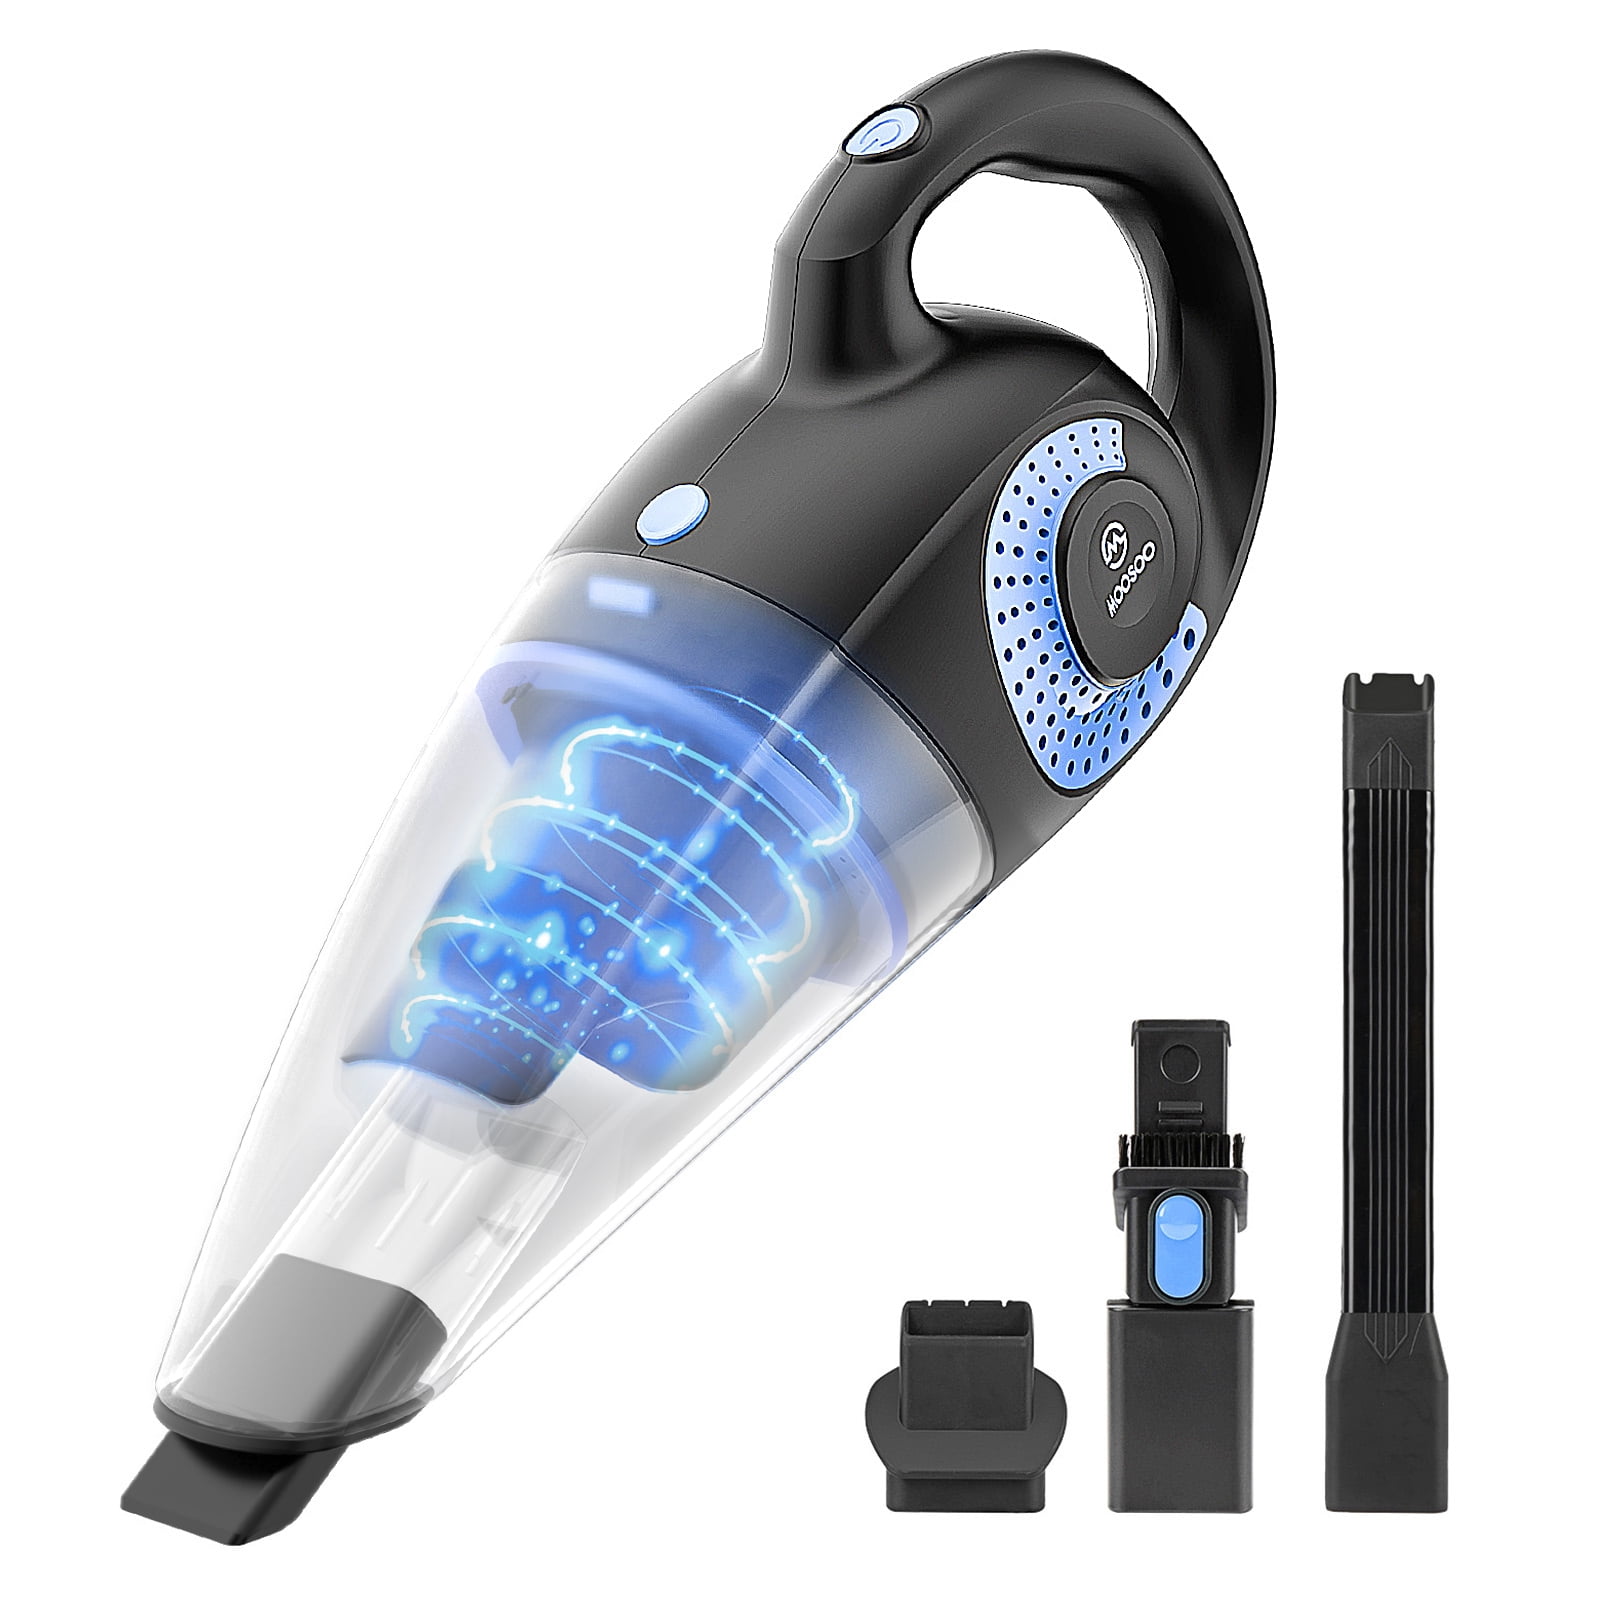 Wireless Portable Handheld USB Cordless Wet/Dry Use Rechargeable Vacuum Cleaner 